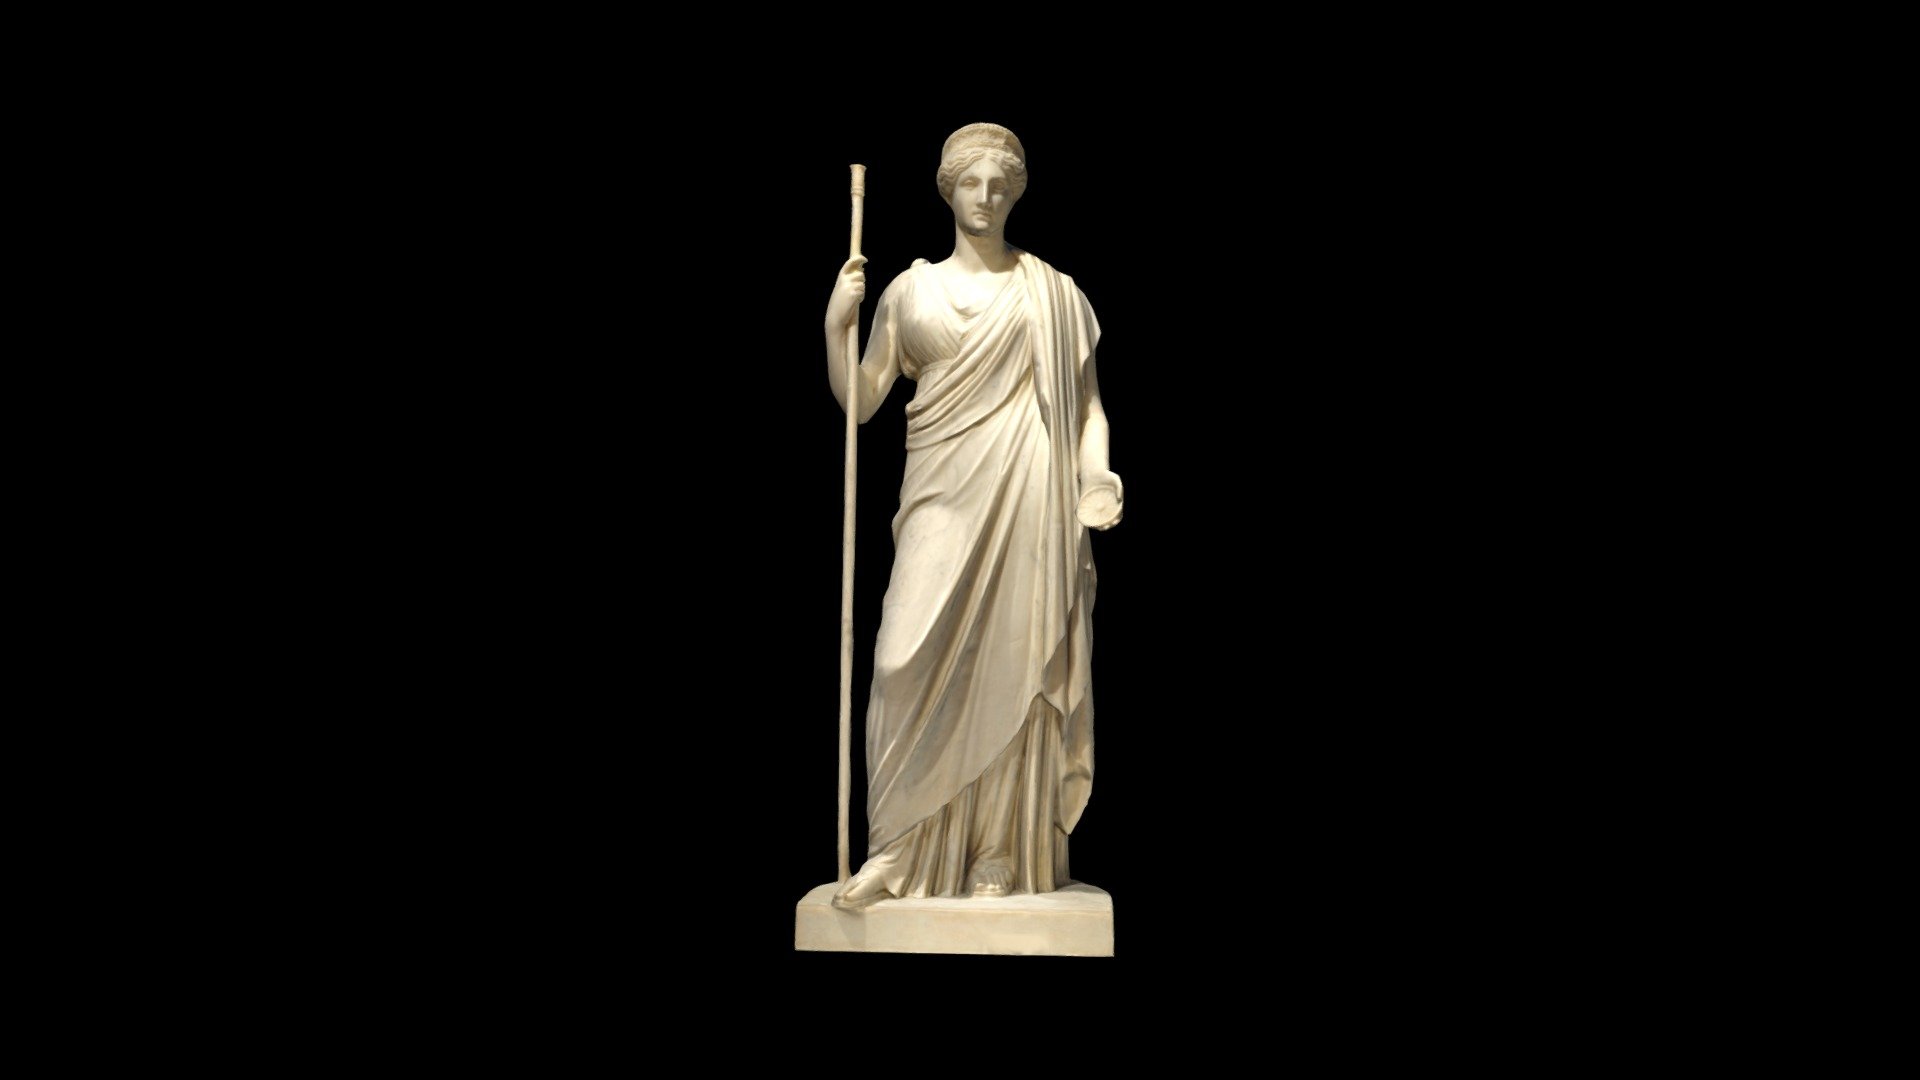 Juno is an ancient Roman goddess, the protector and special counselor of the state. She is the wife of the chief god, Jupiter, and the mother of Mars and Vulcan.

In Greek mythology, her equivalent is Hera.

As the patron goddess of Rome and the Roman Empire, Juno was called Regina (&ldquo;Queen